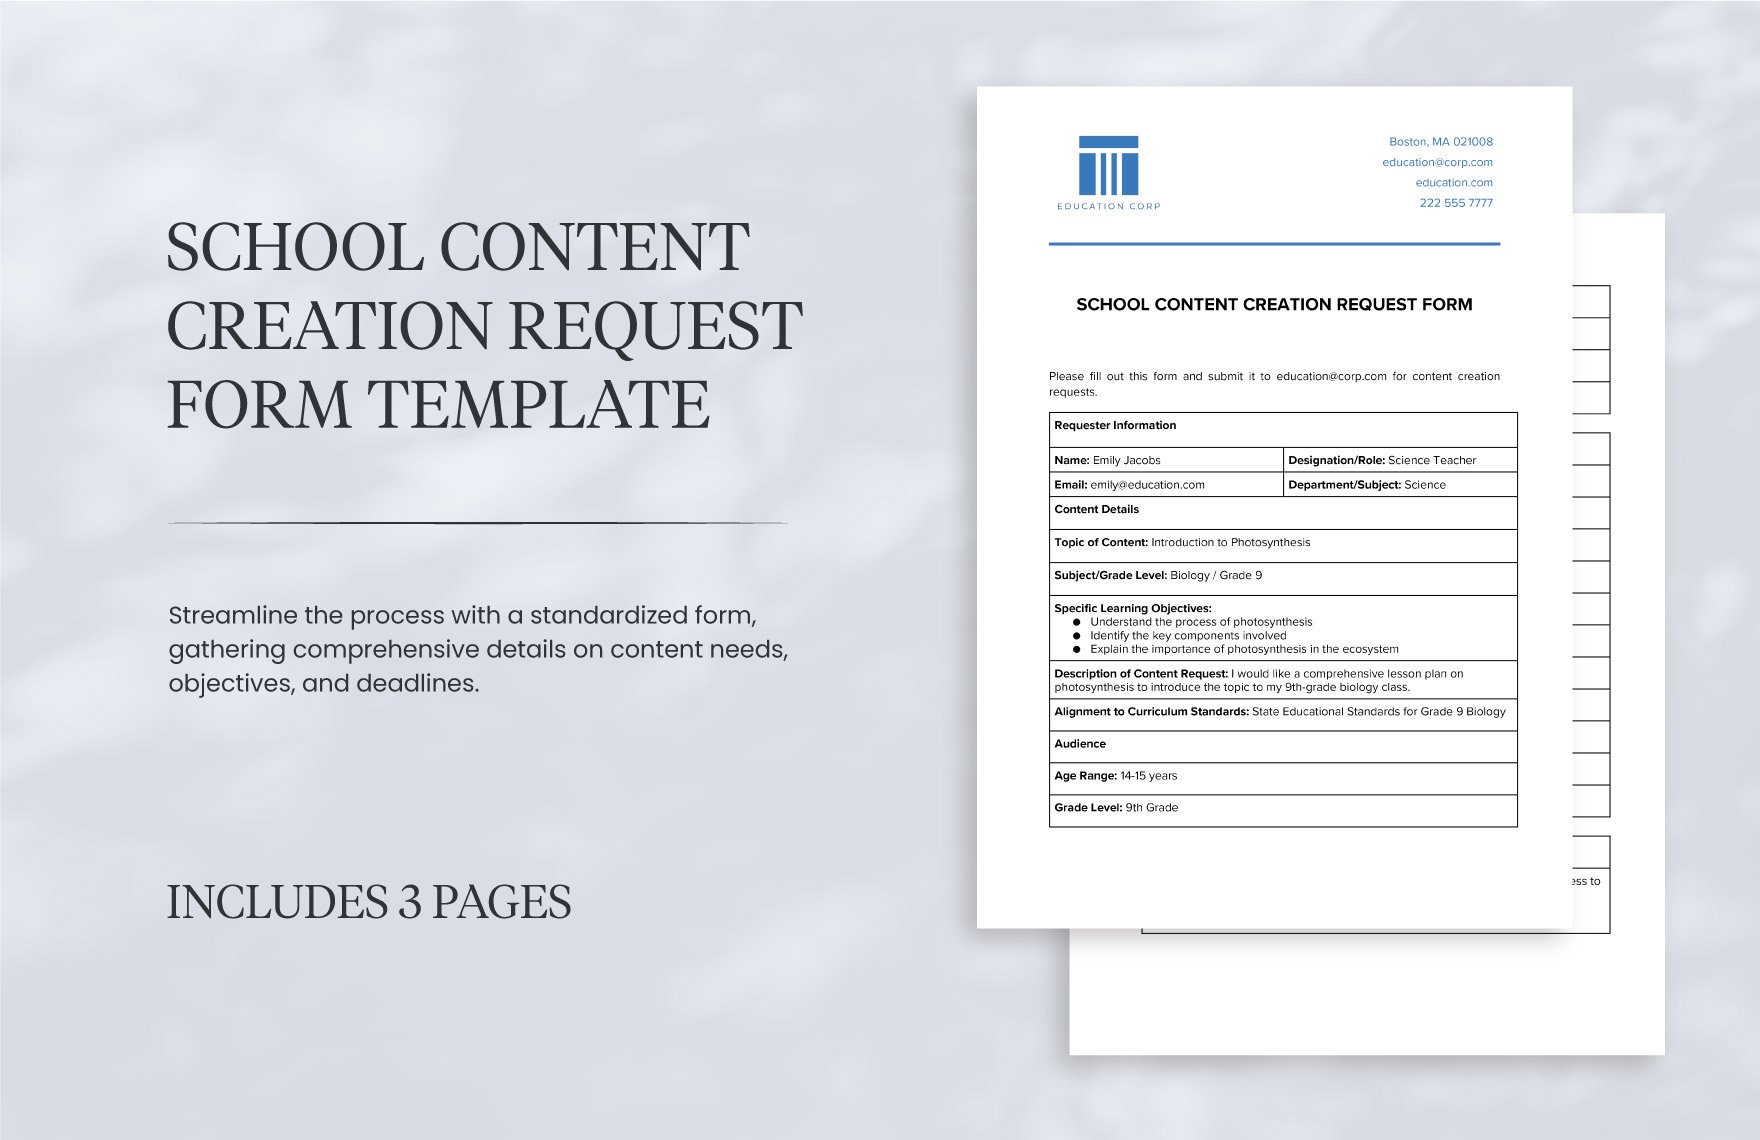 School Content Creation Request Form Template in Word, Google Docs, PDF